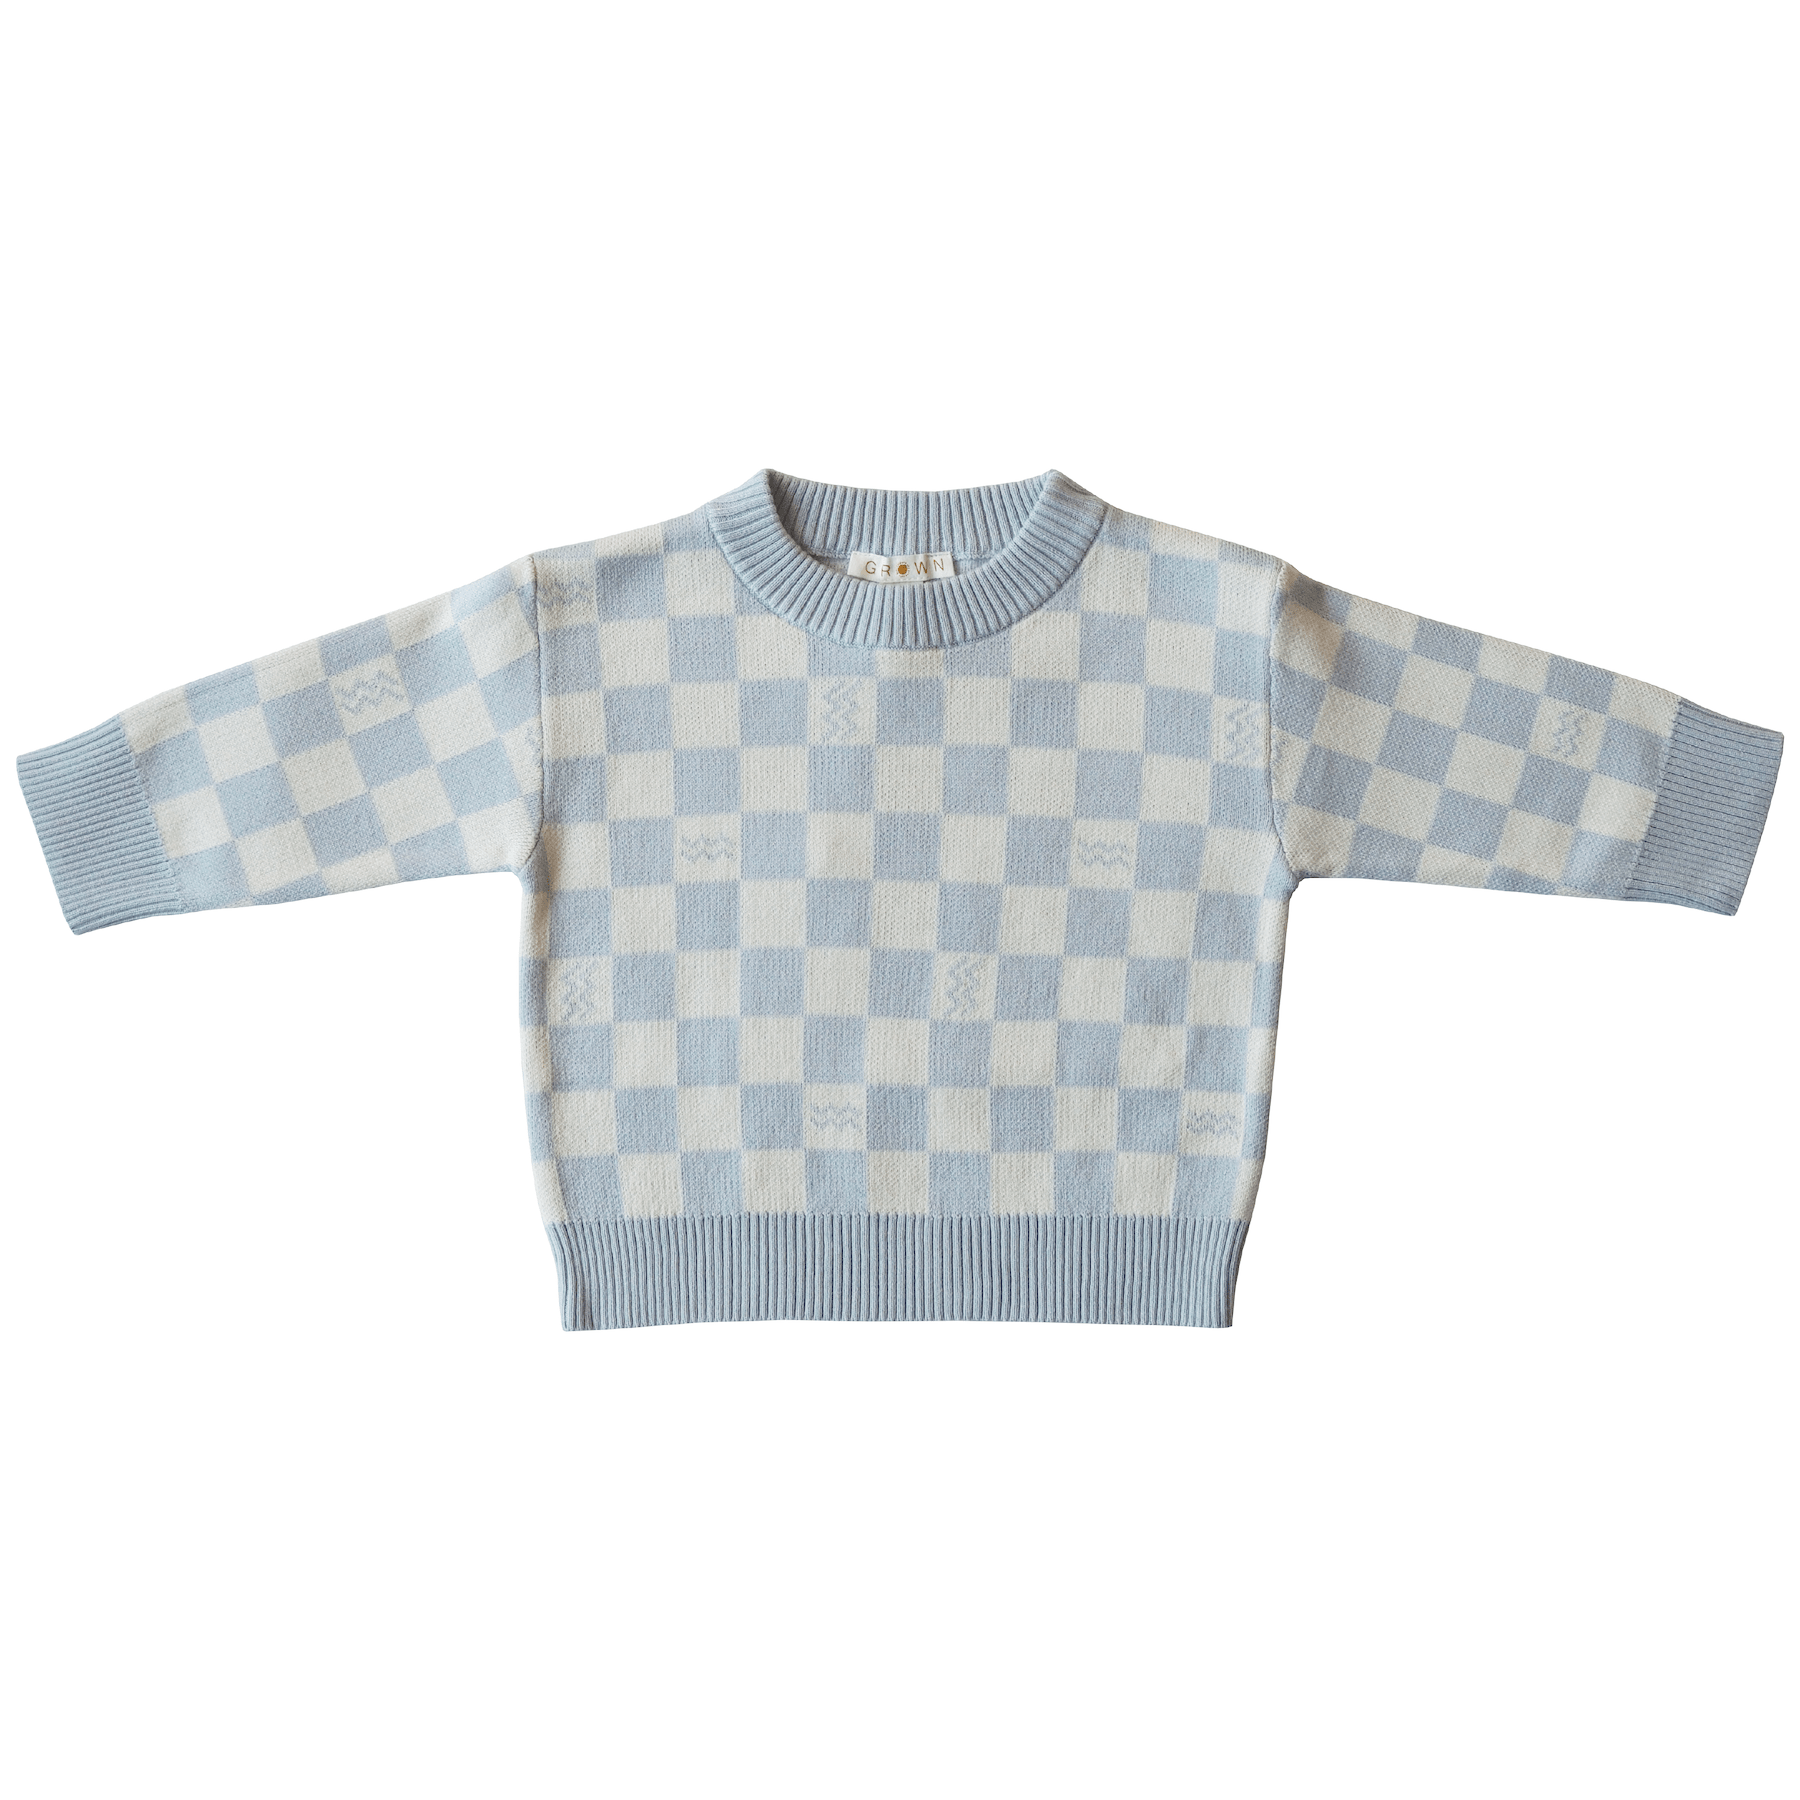 aquarius pull over by Grown